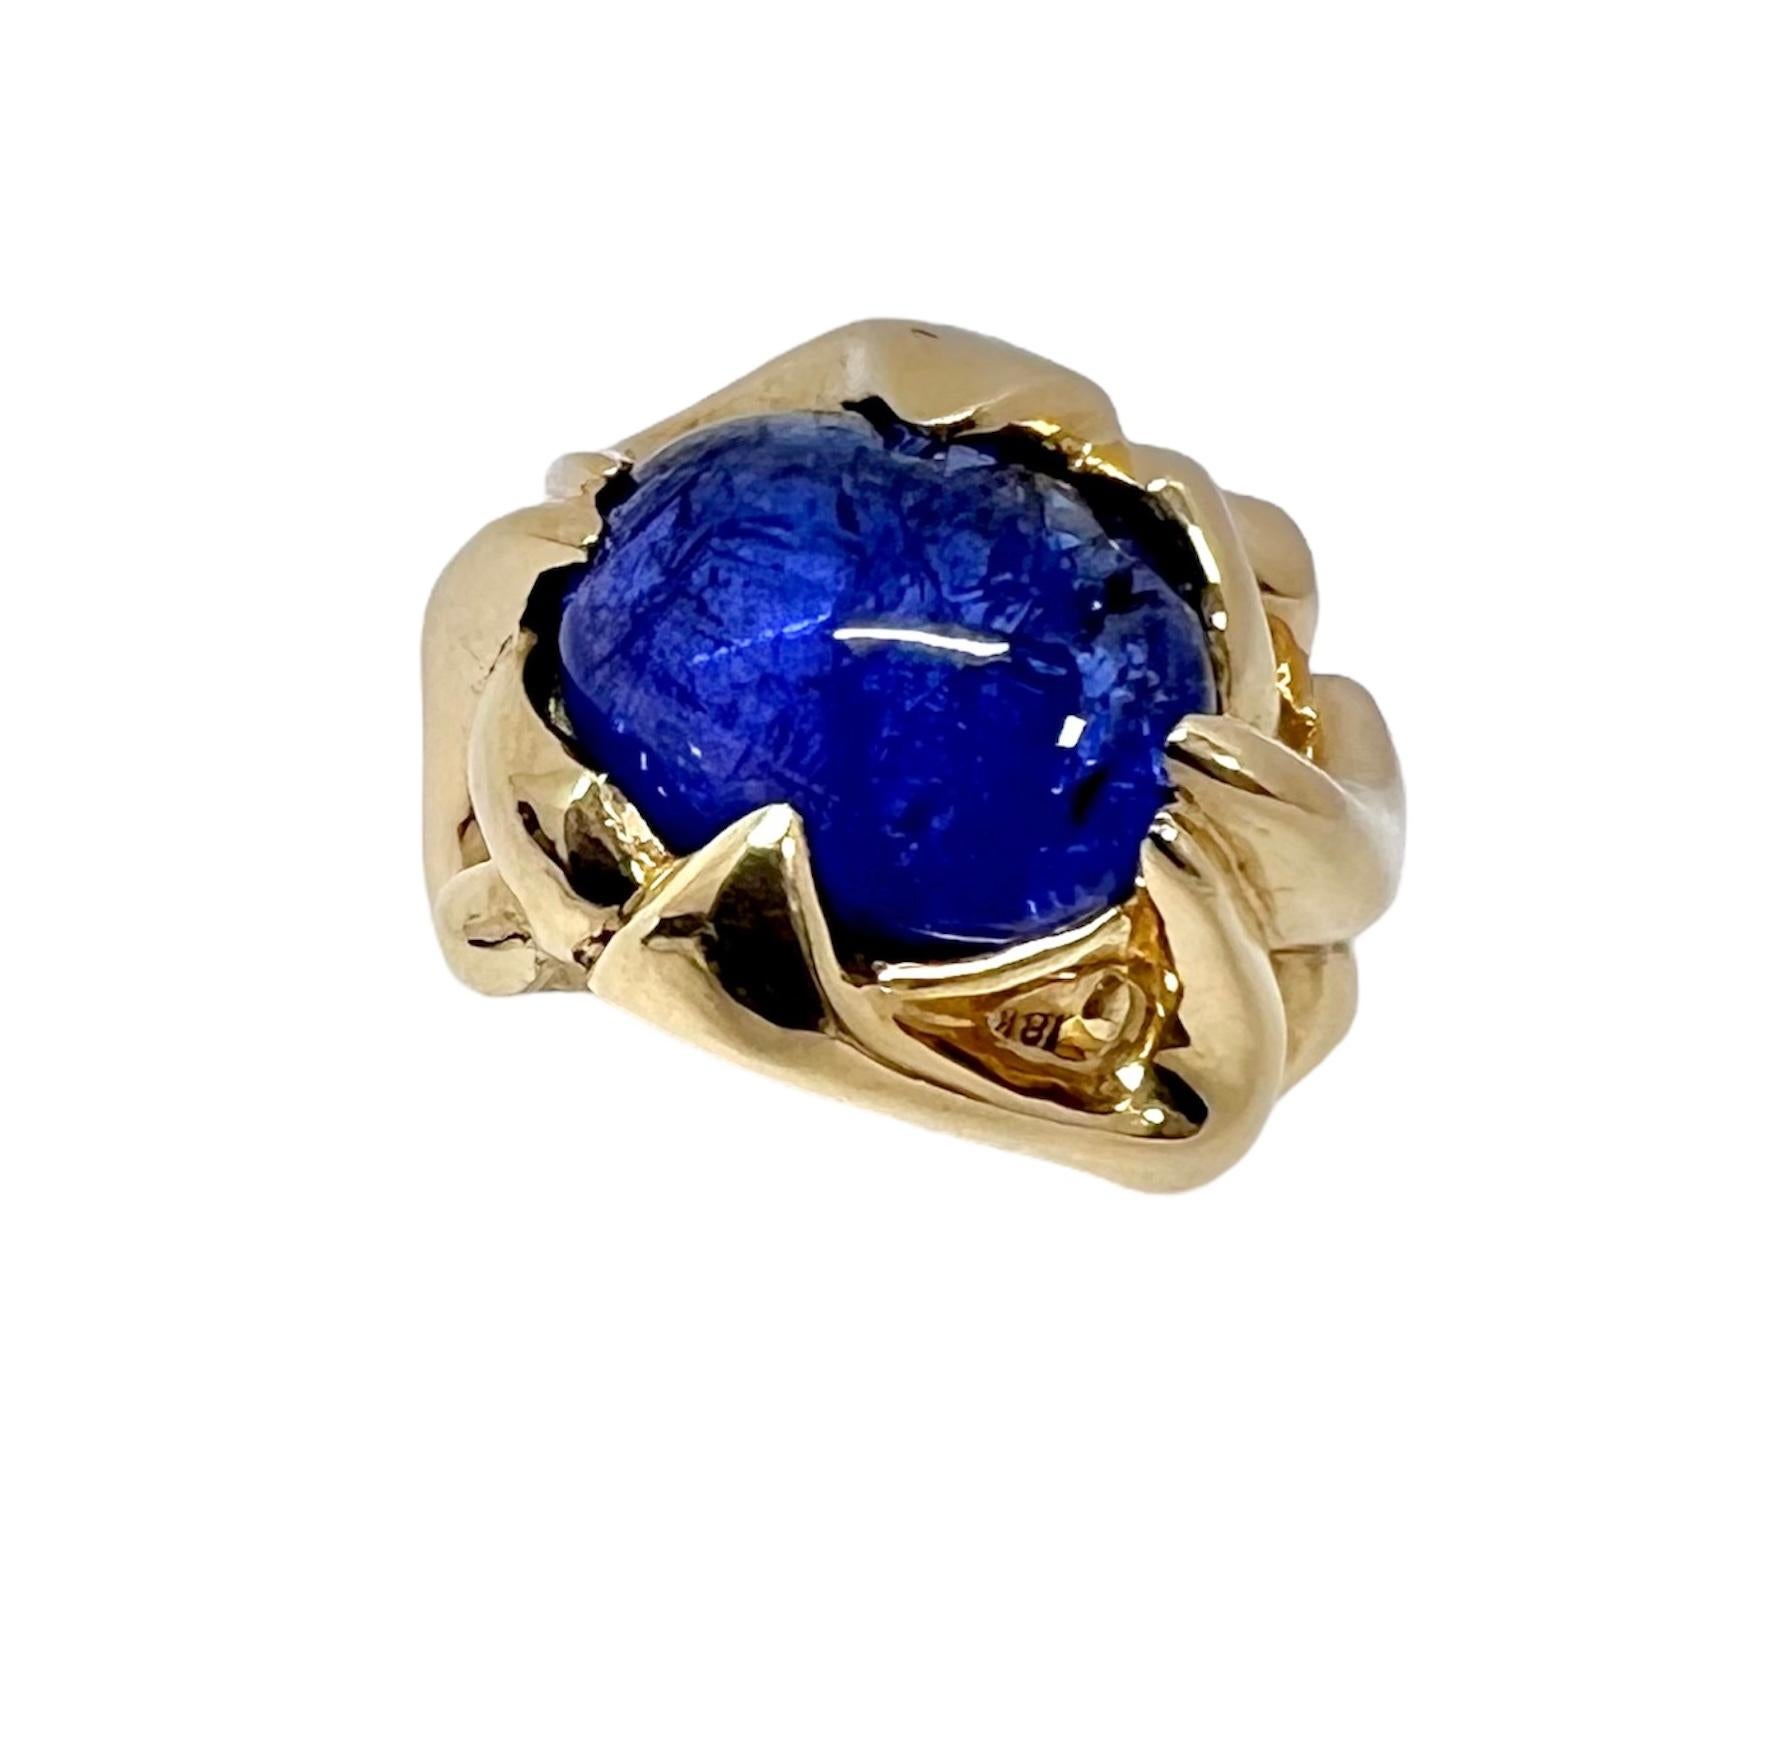 Women's One of a Kind Cocktail Ring with 10 Carat Cabochon Tanzanite For Sale